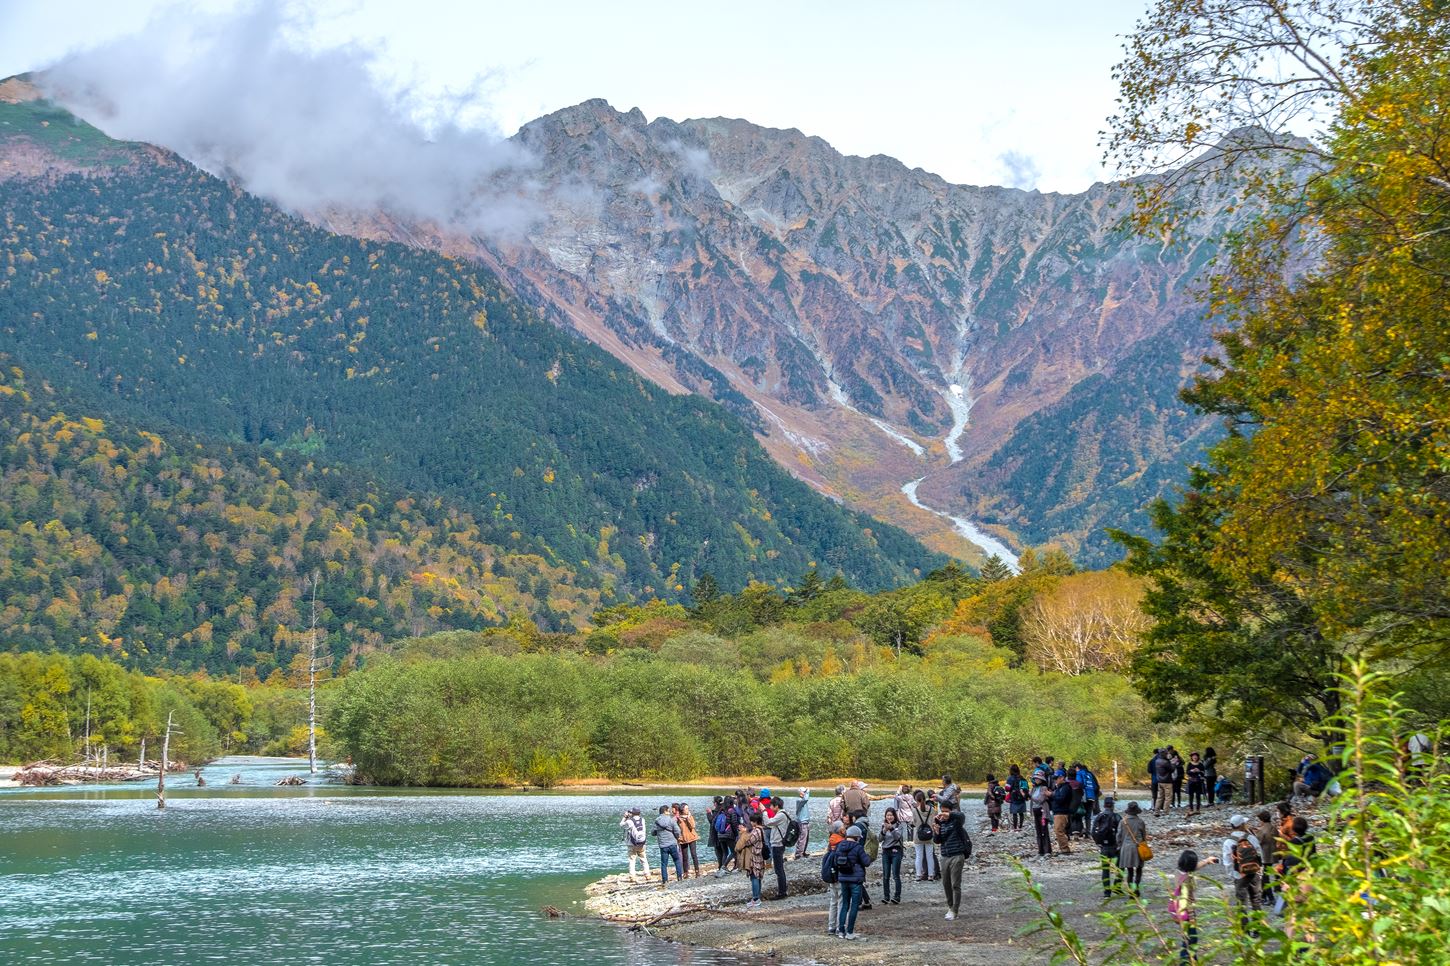 Sightseeing scenery that simply shows the weather in Nagano in October6